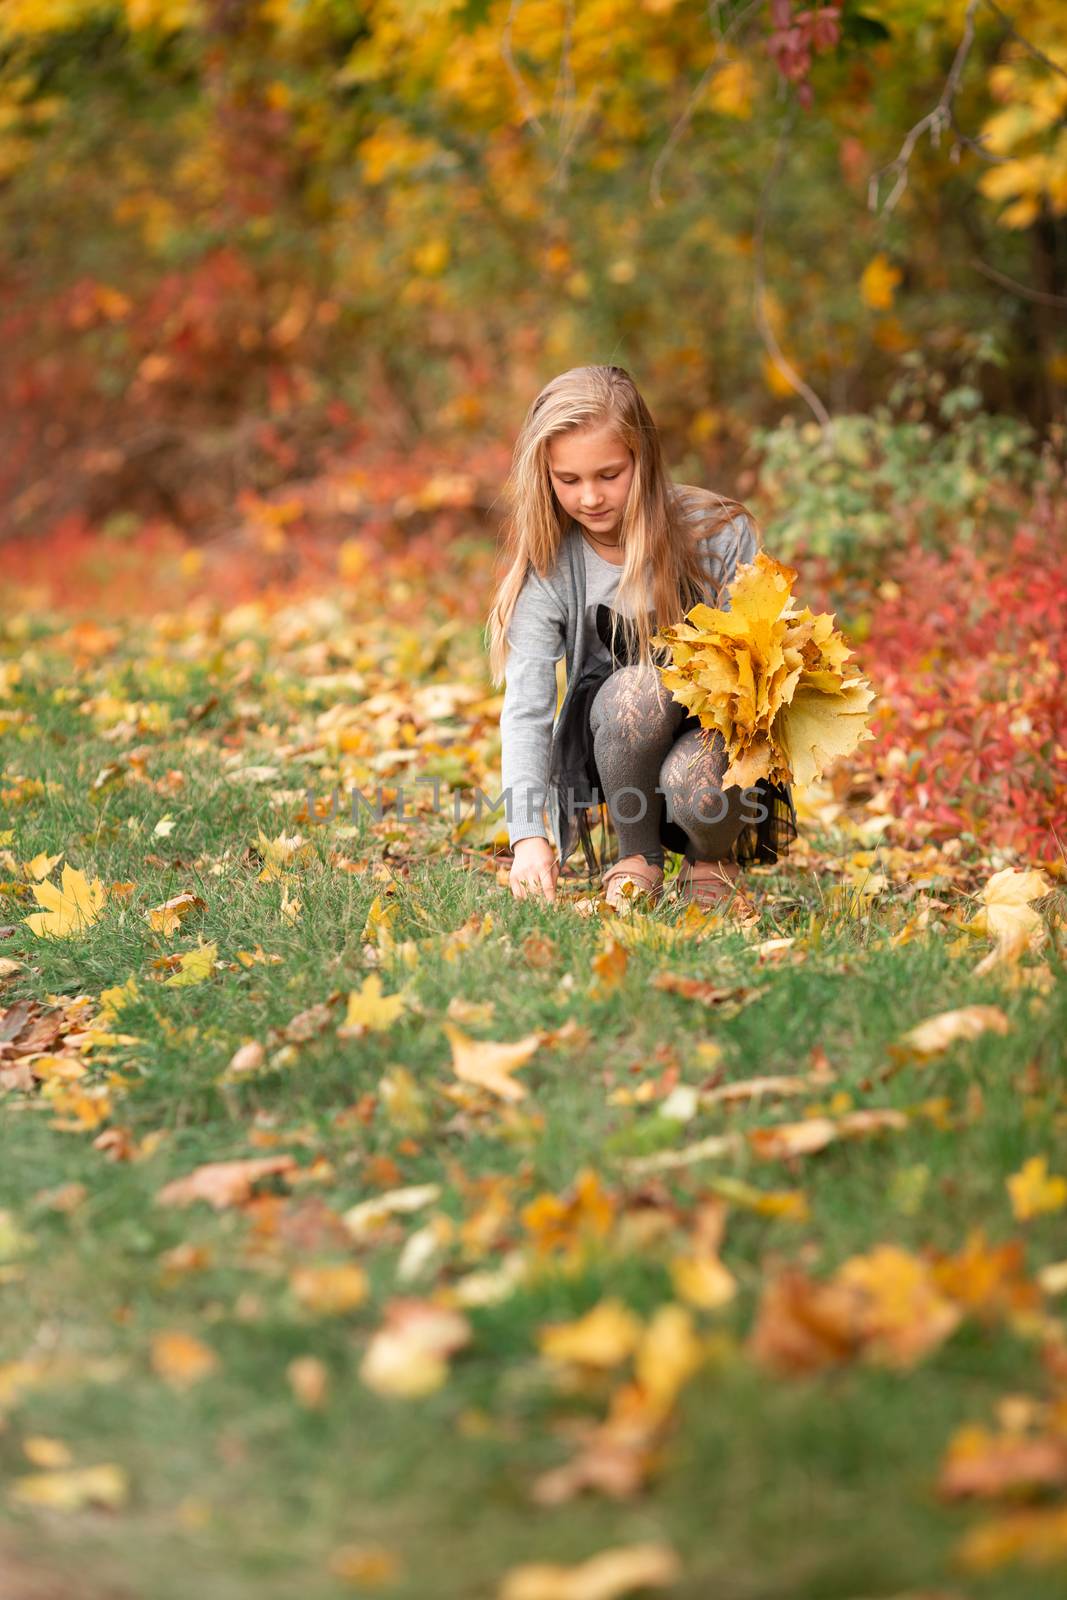 Beautiful little girl gathering autumn leaves in the park outdoor